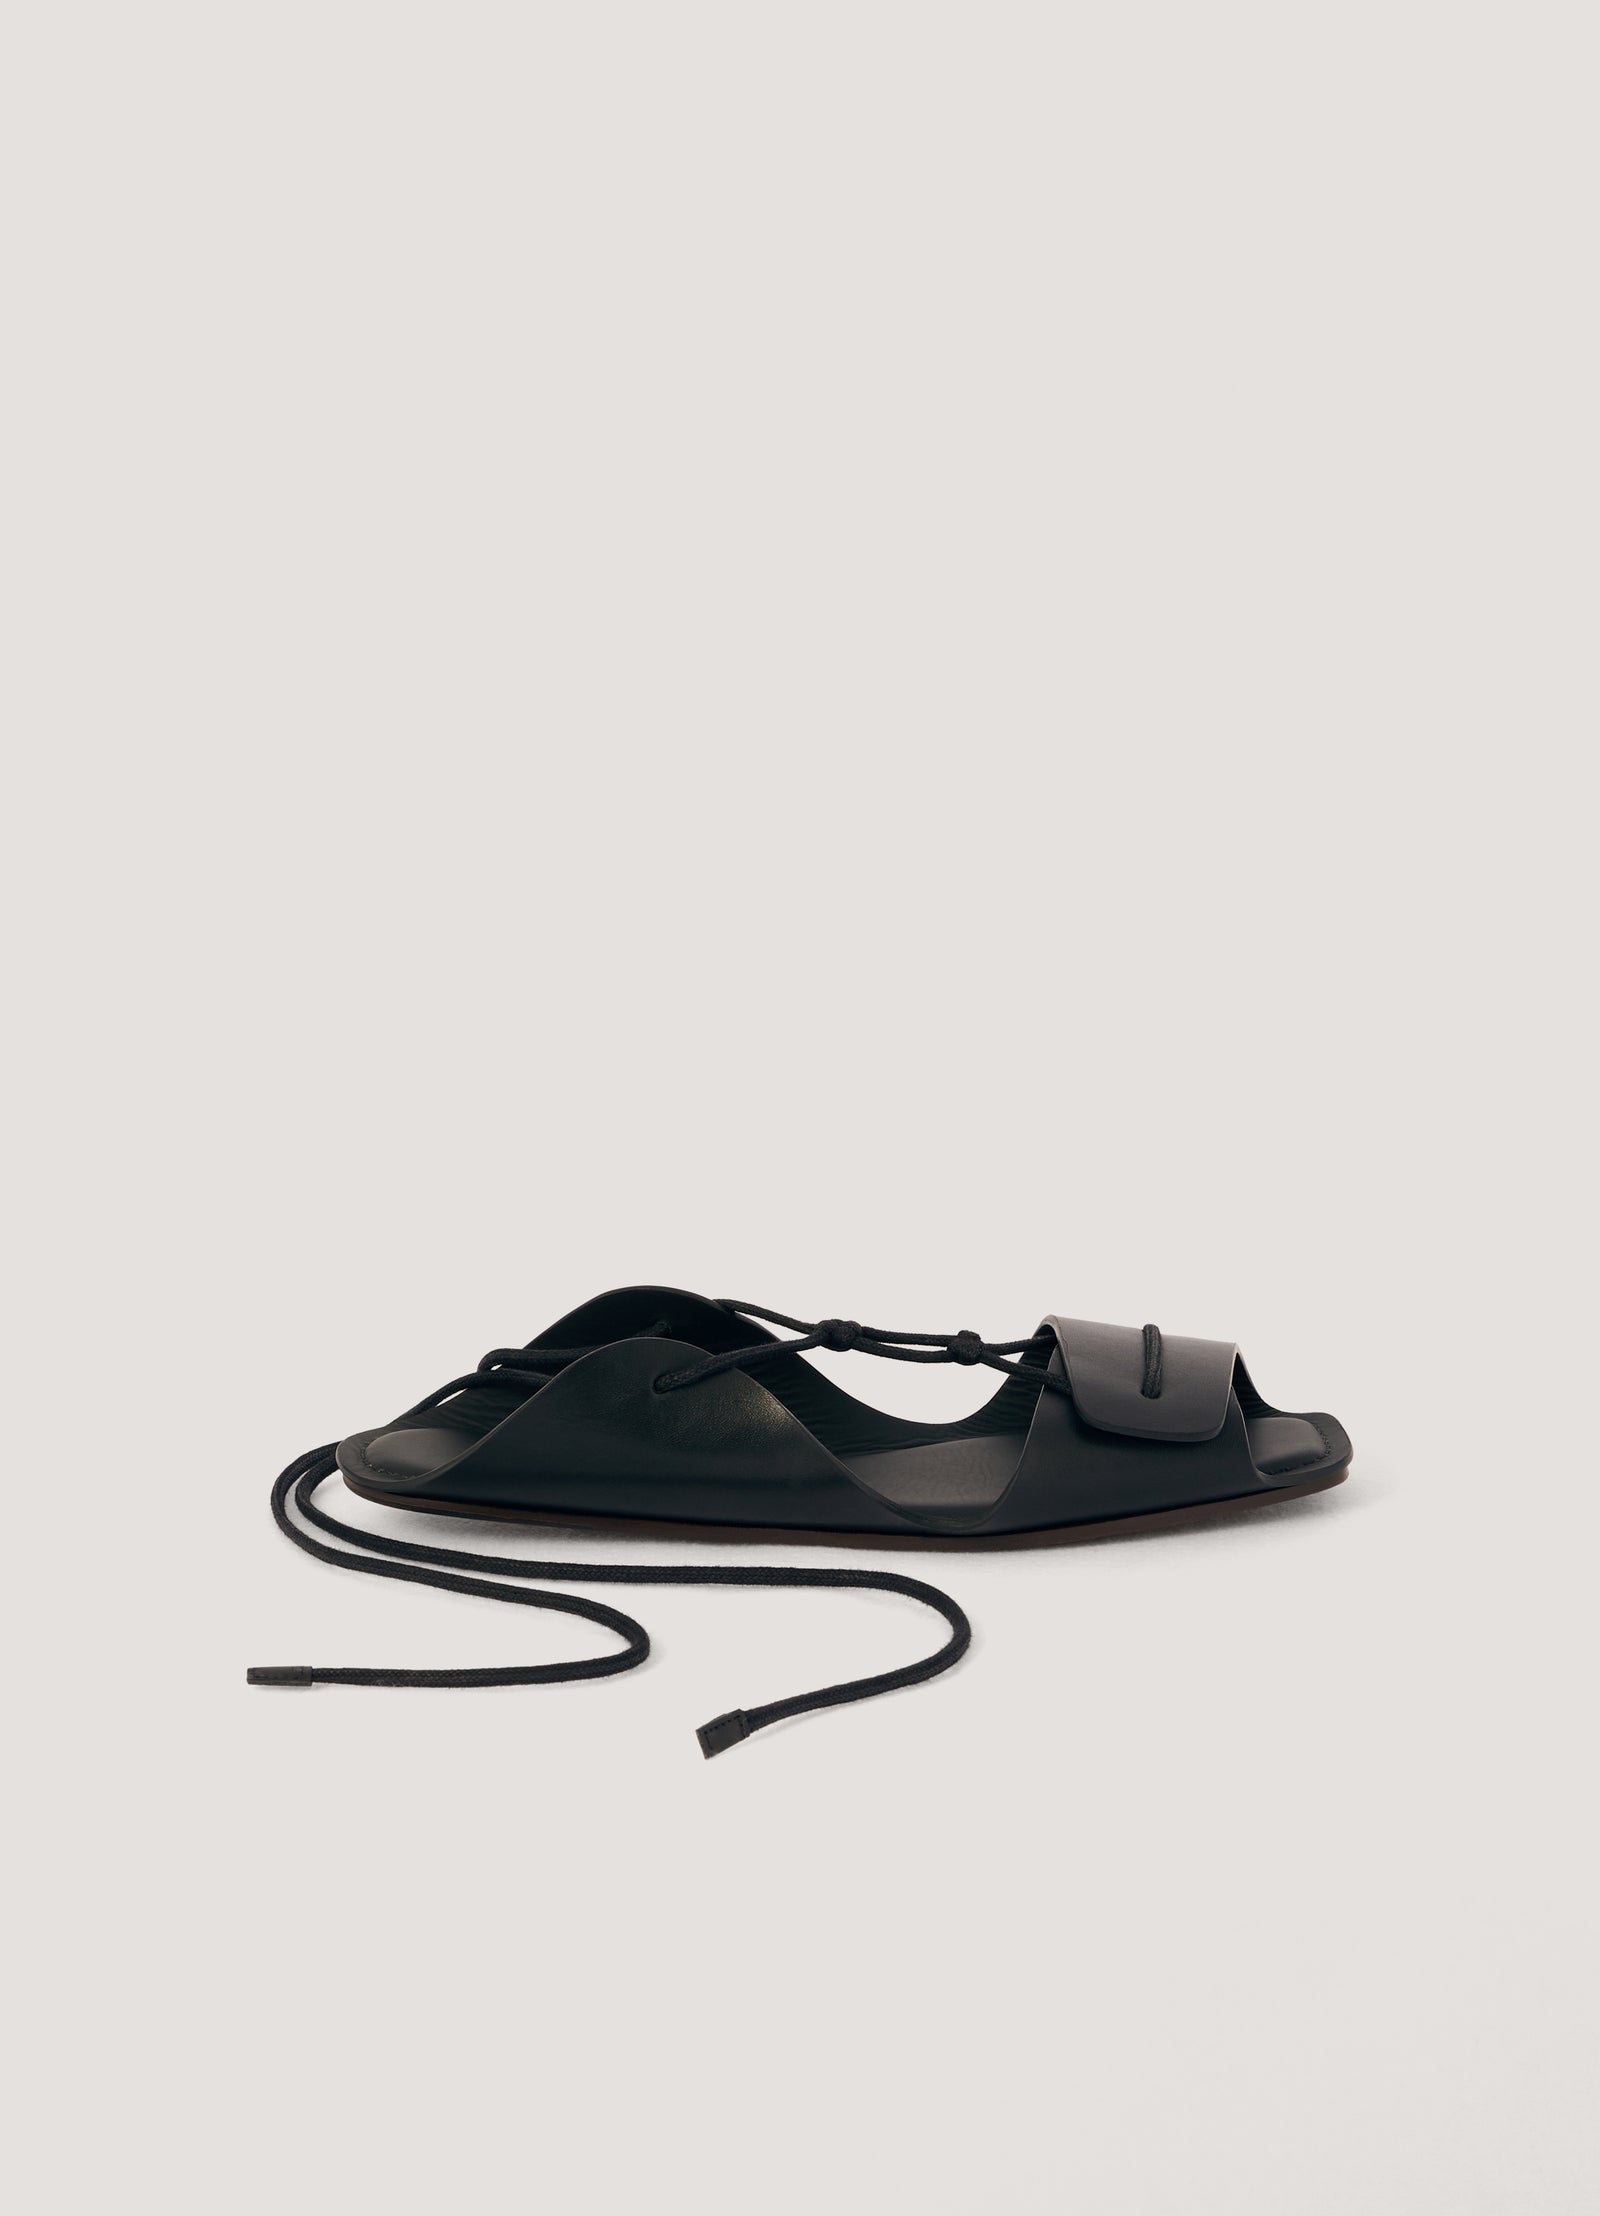 LEMAIRE 22SS LEATHER BACK STRAP SANDAL-